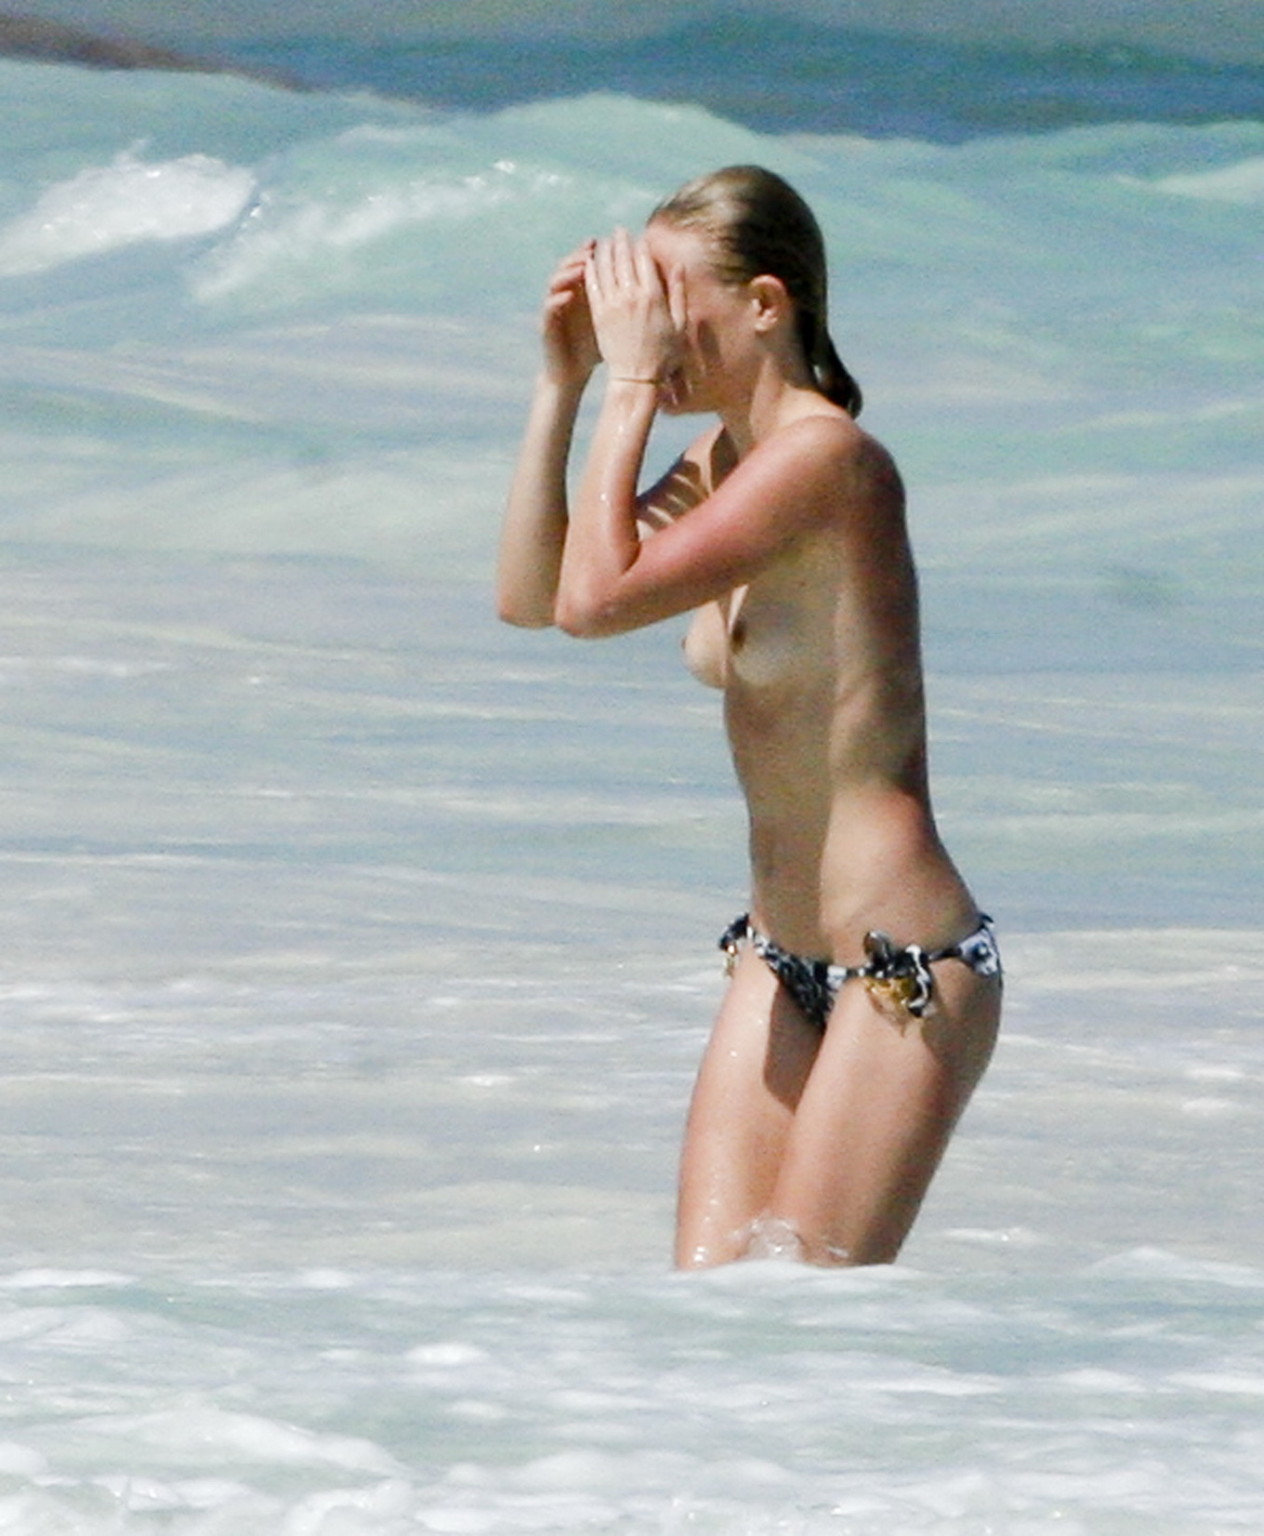 Kate bosworth oben ohne am Strand in cancun mexico
 #75308613